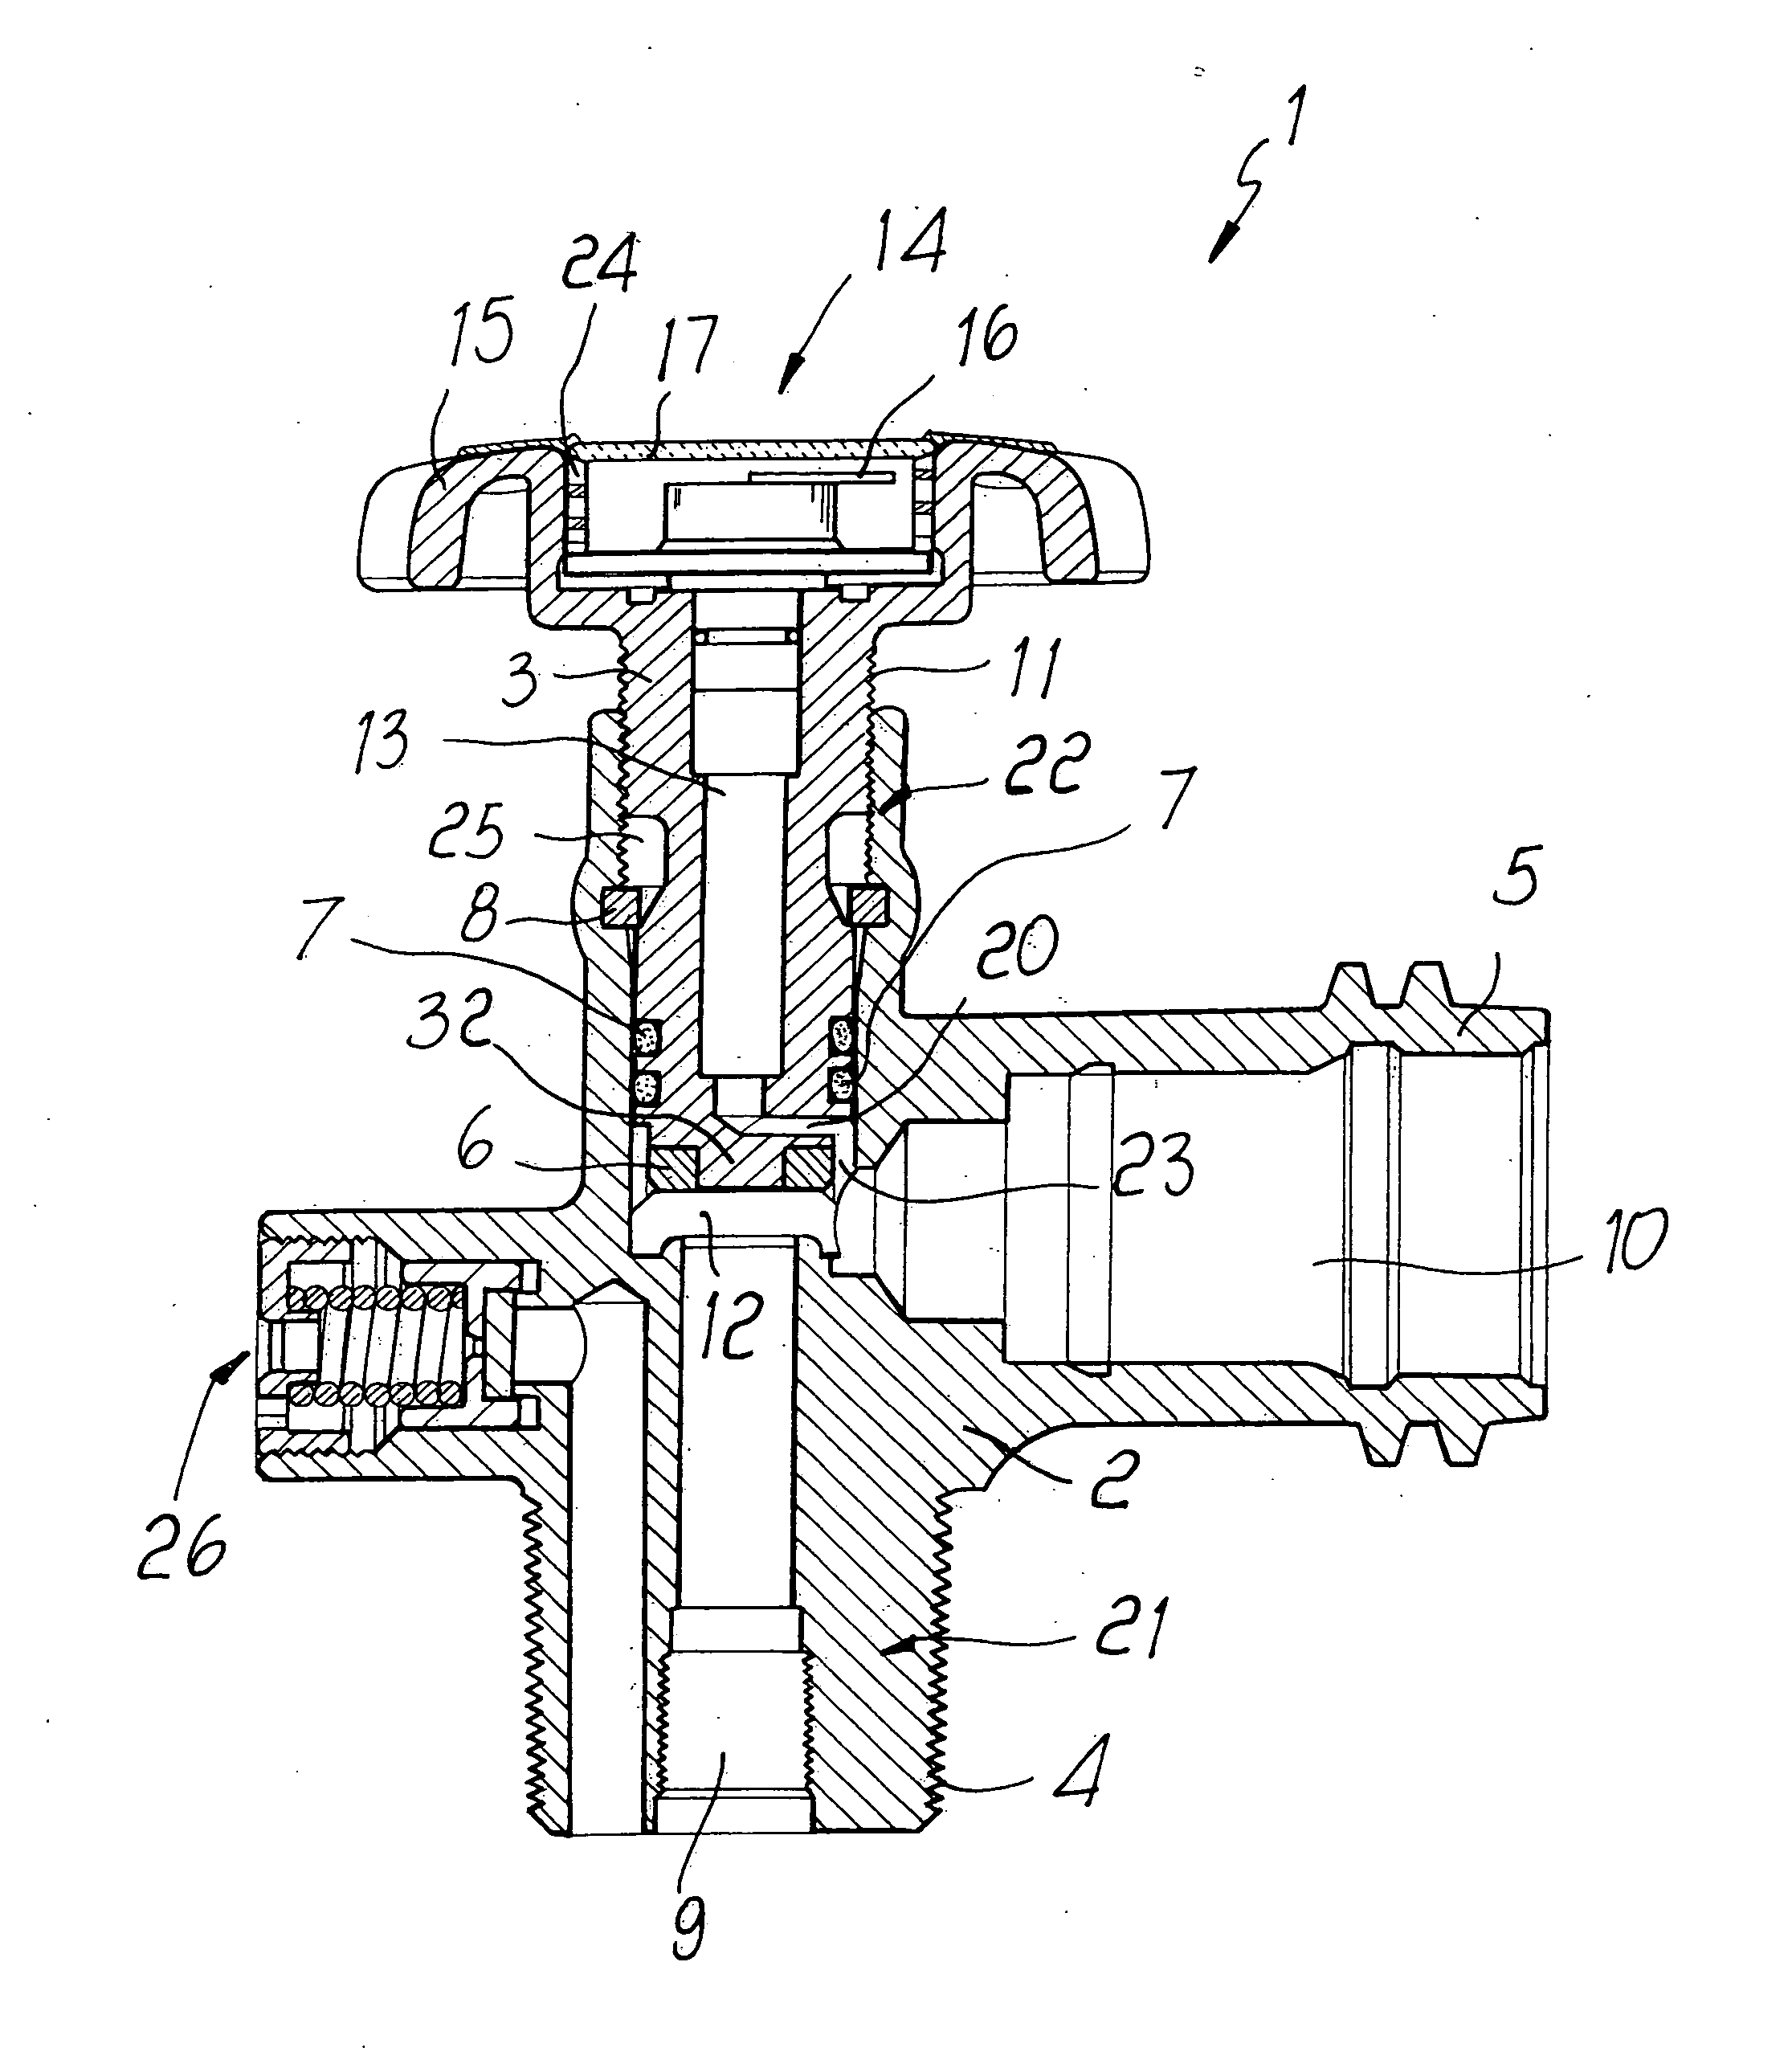 Flow control valve for cylinders of liquefied gases, having a means for indicating the status of the fluid